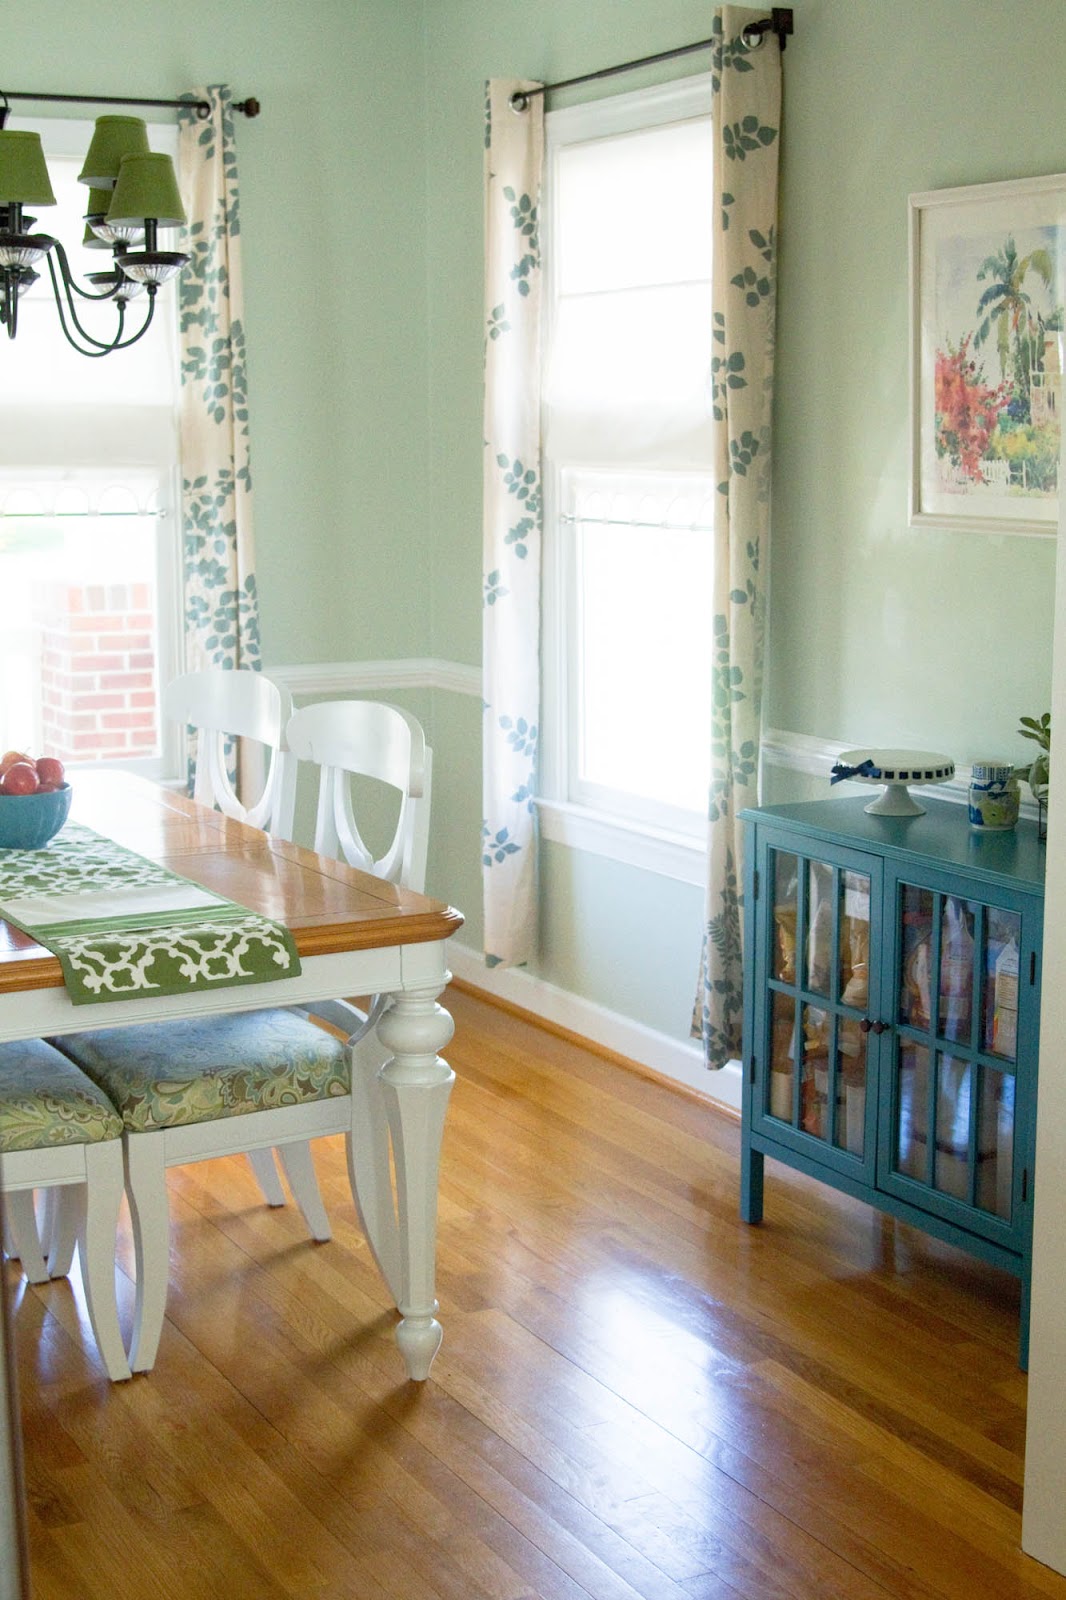 Little Bits of Home: Dining Room Progress: Curtains + Storage